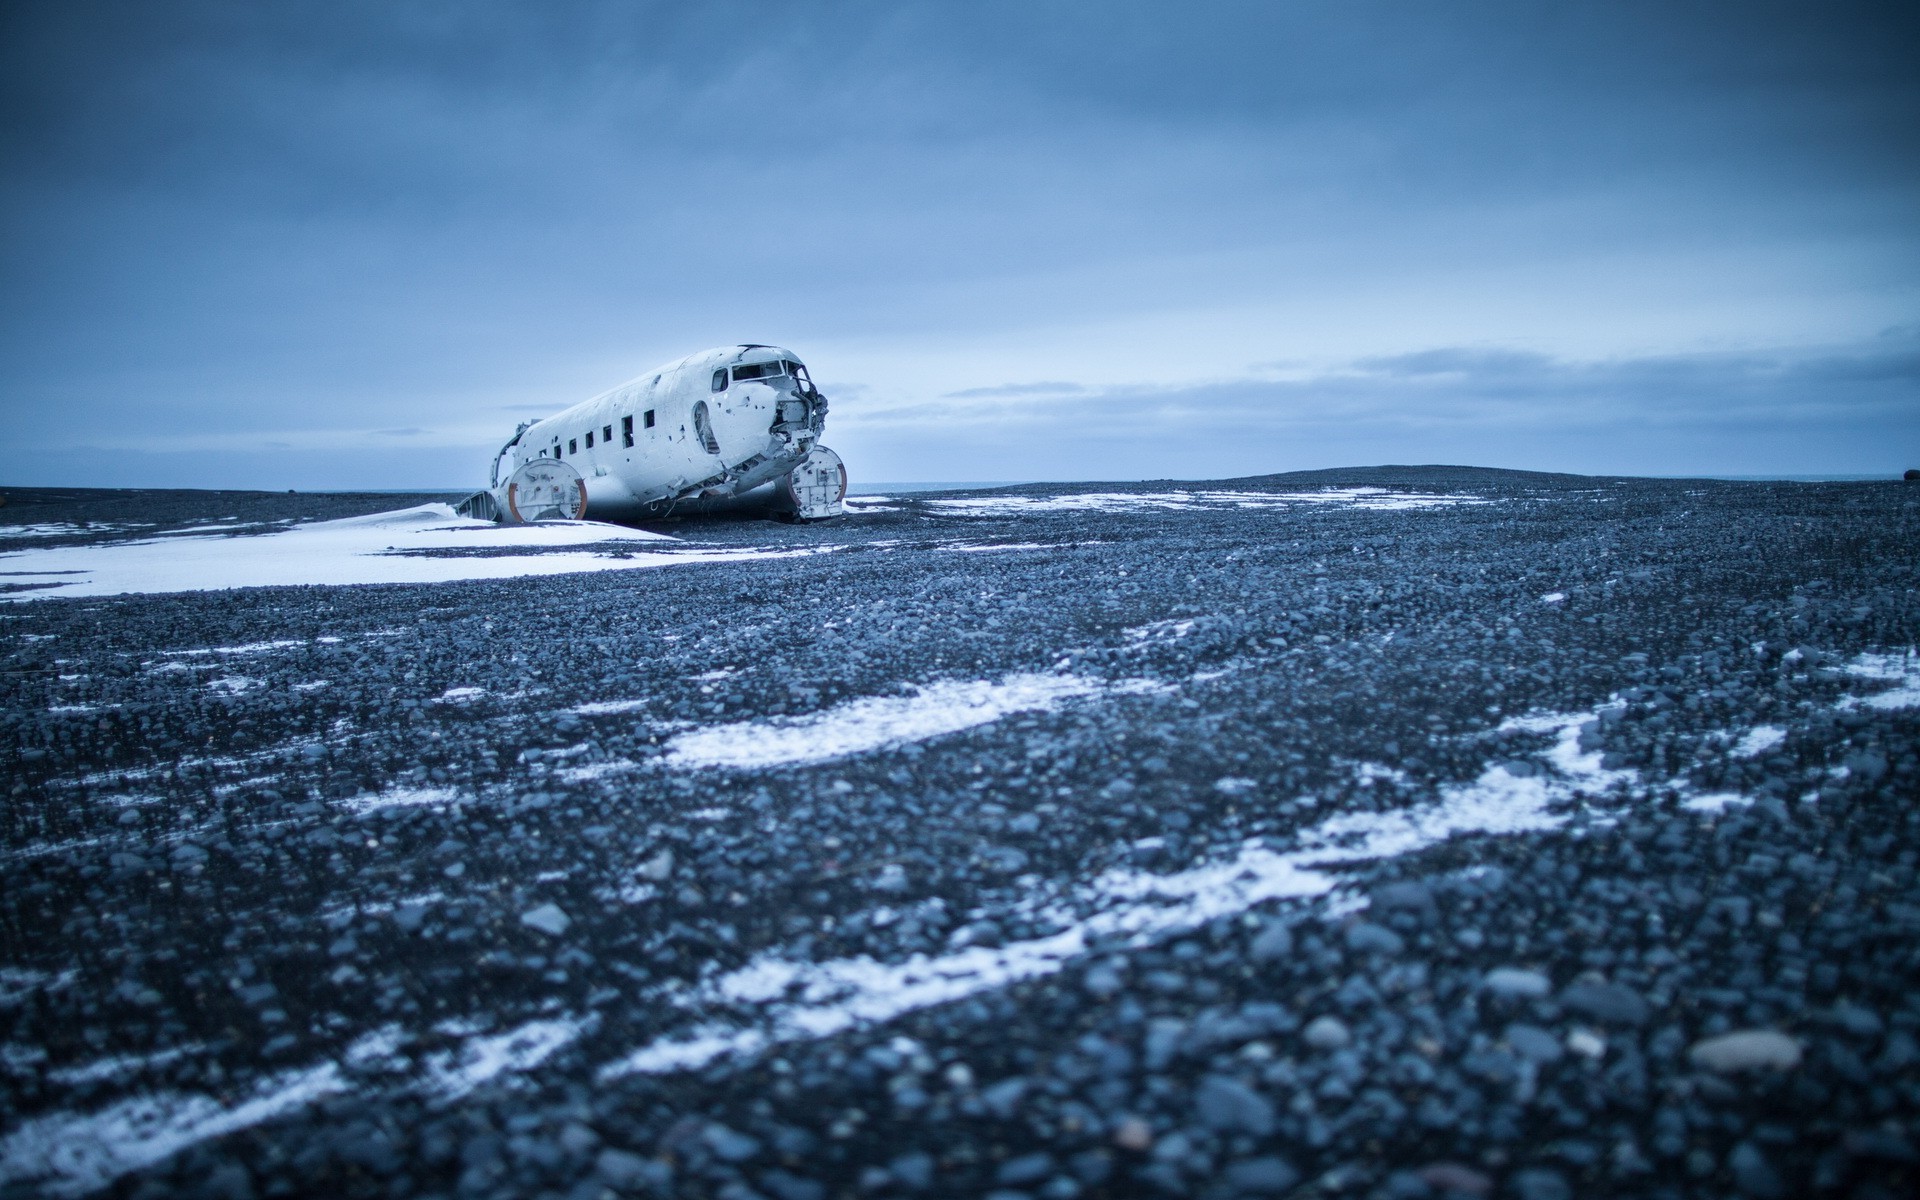 landscape, Wreck, Vehicle, Aircraft, Overcast, Snow, Abandoned Wallpaper